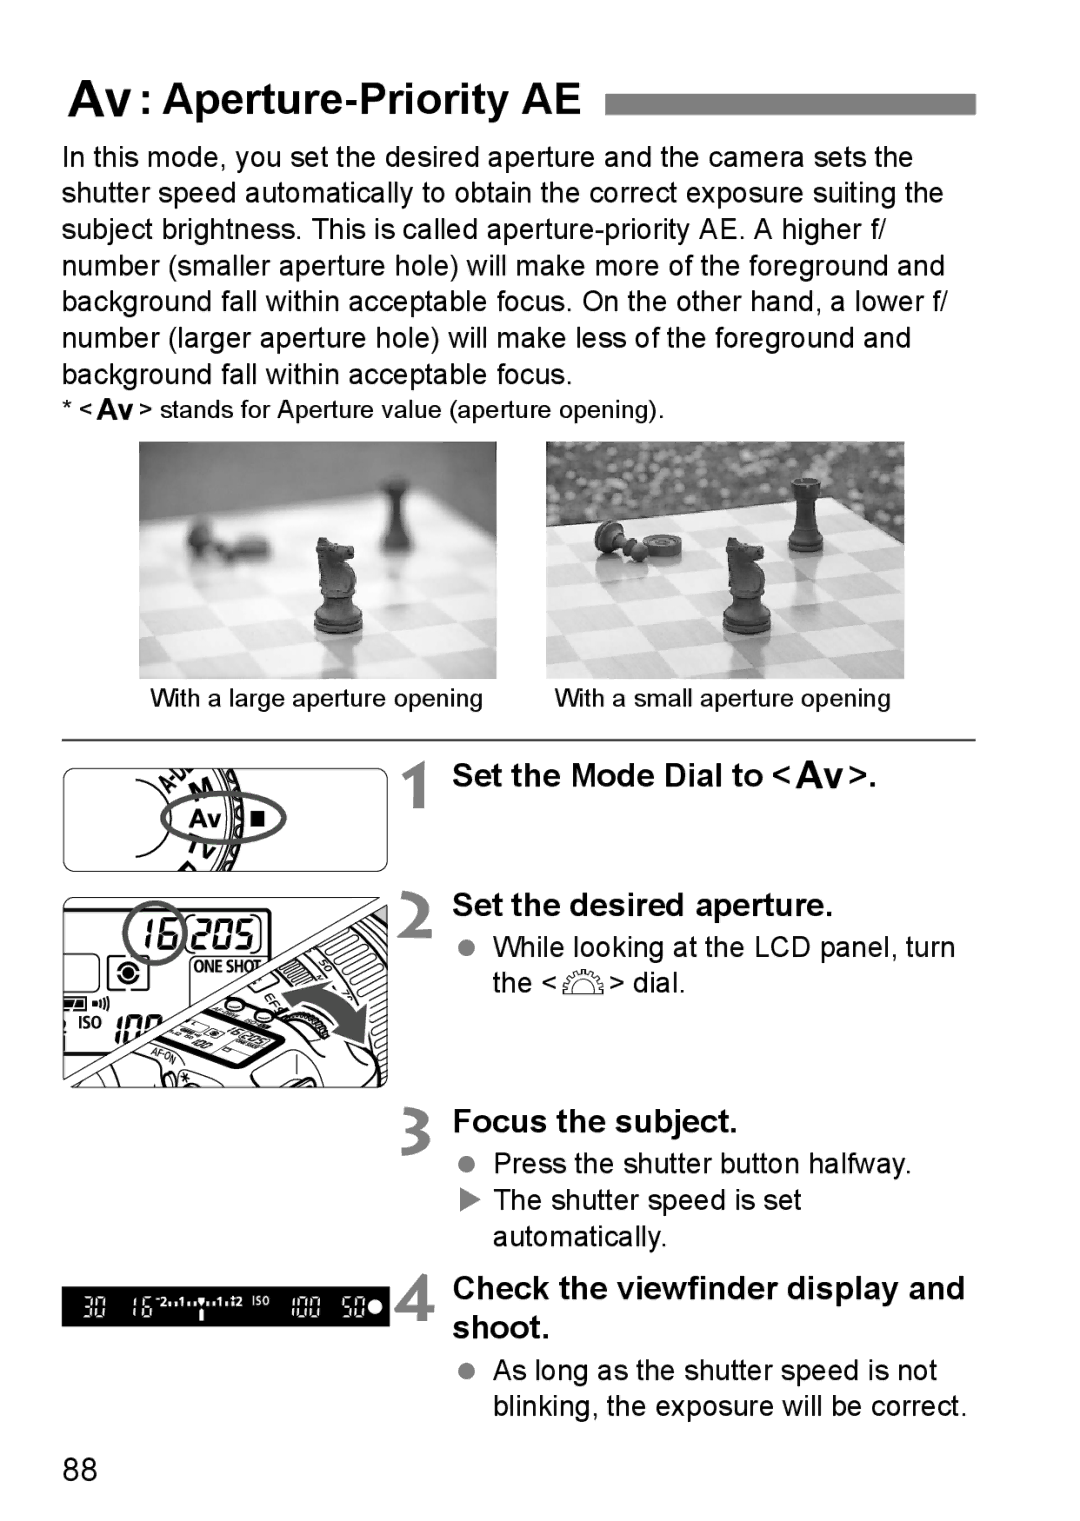 Canon EOS40D instruction manual Aperture-Priority AE, Set the Mode Dial to f Set the desired aperture 